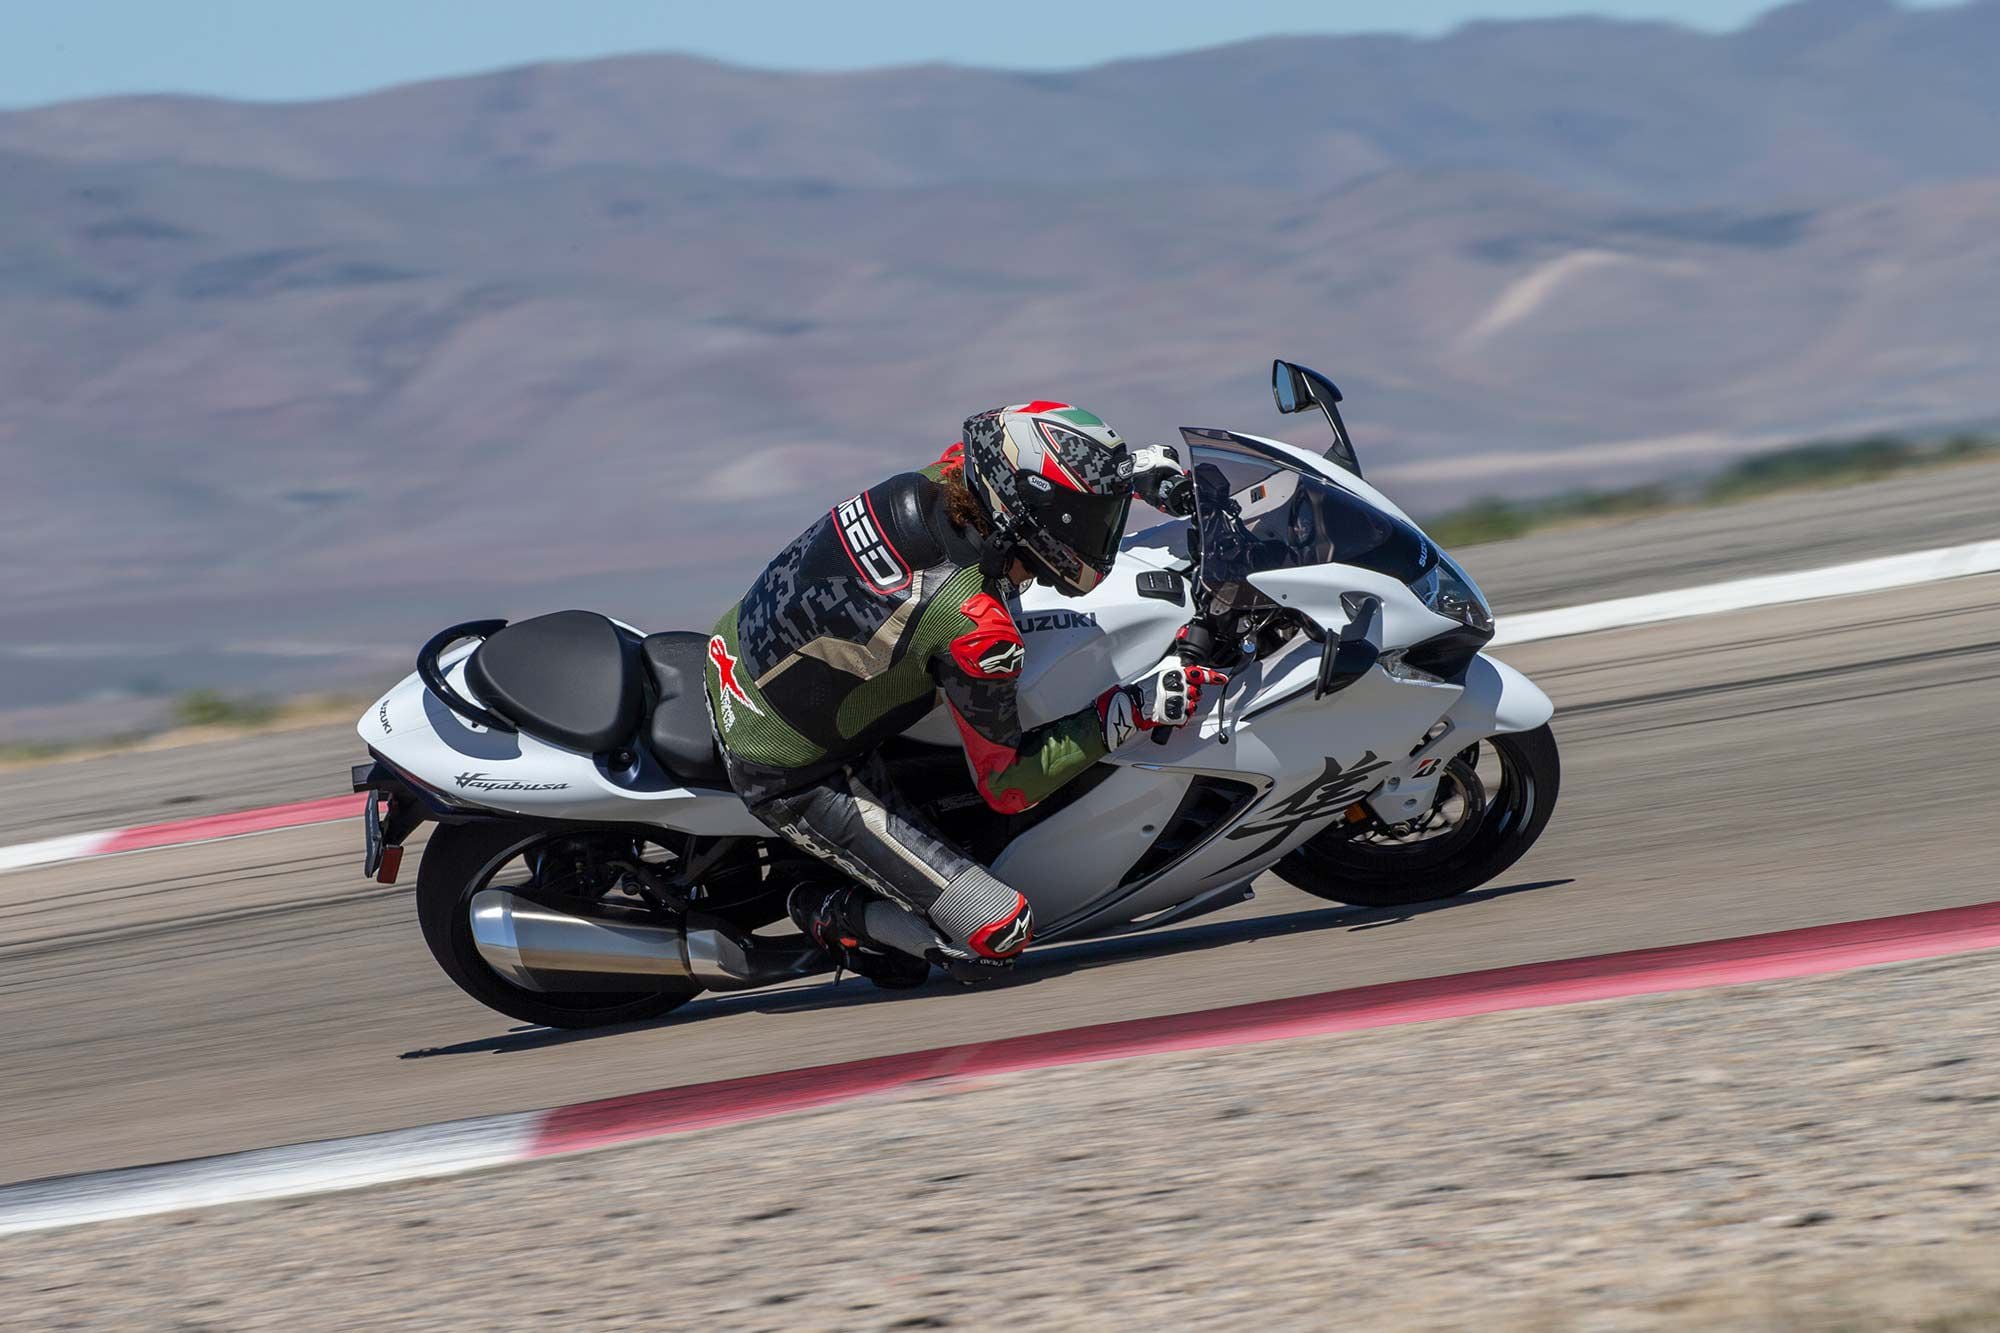 For a motorcycle that weighs nearly 600 pounds, the Hayabusa impresses with its agility.